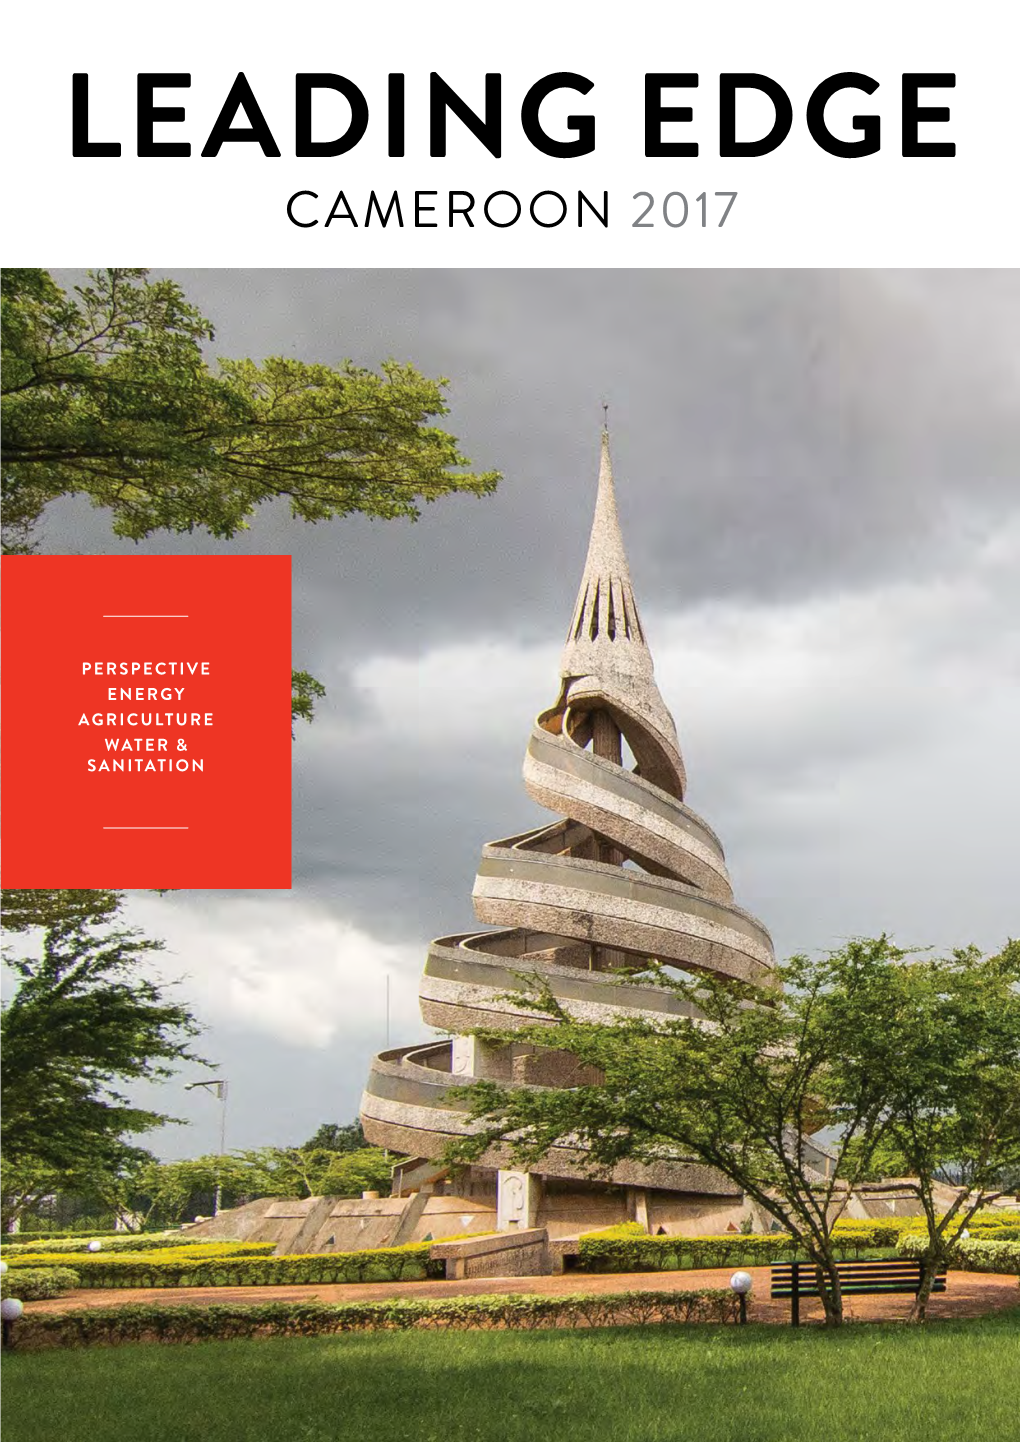 Cameroon 2017 Investment Guide